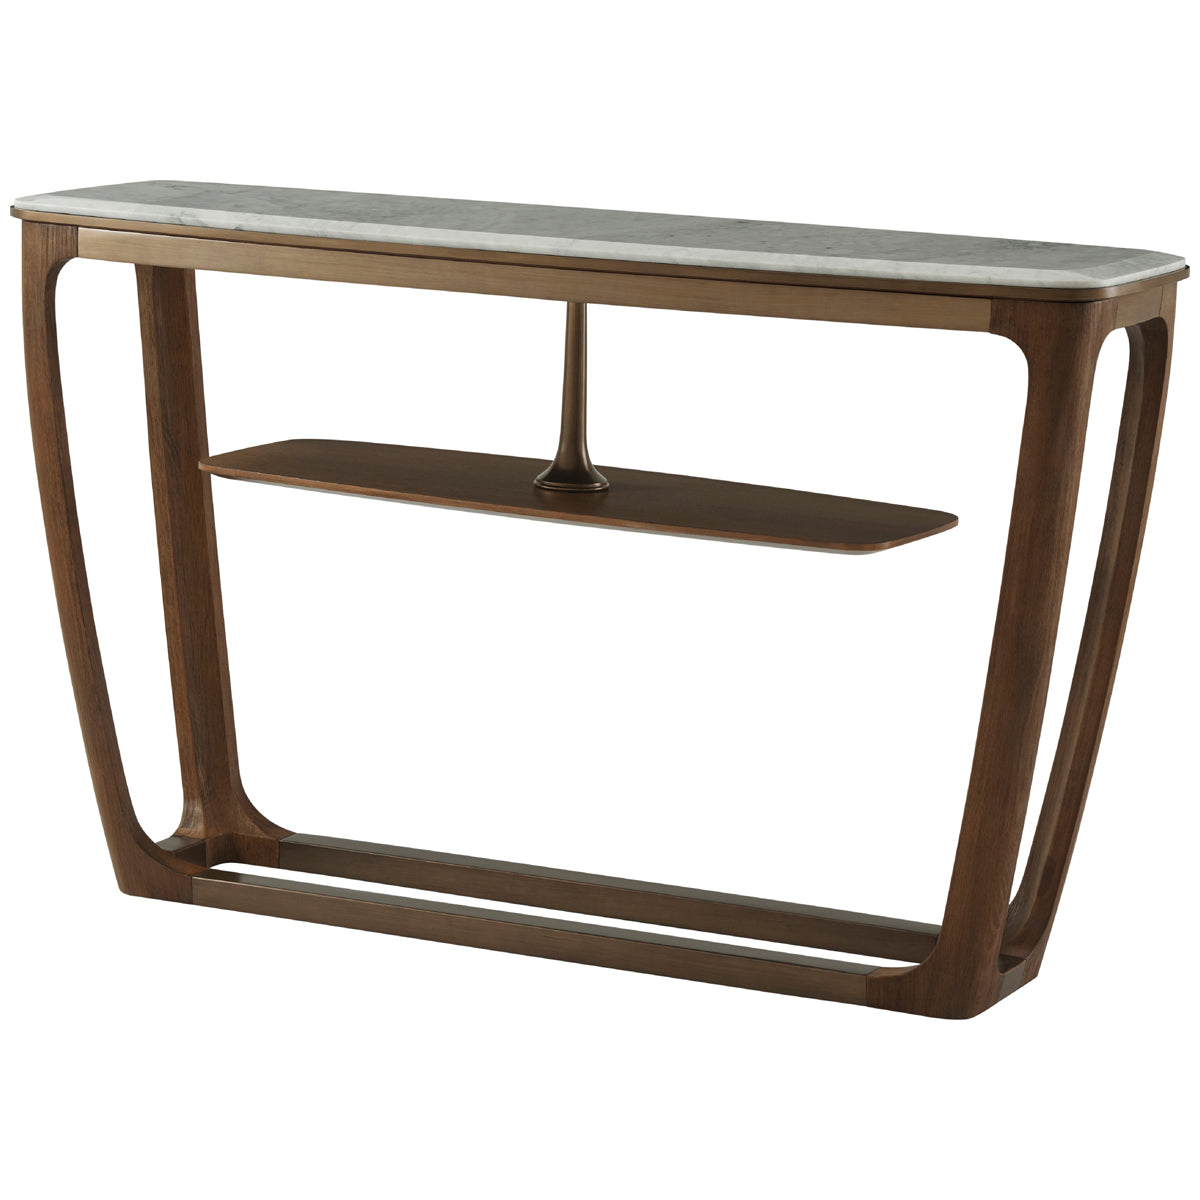 Theodore Alexander Converge Console Table